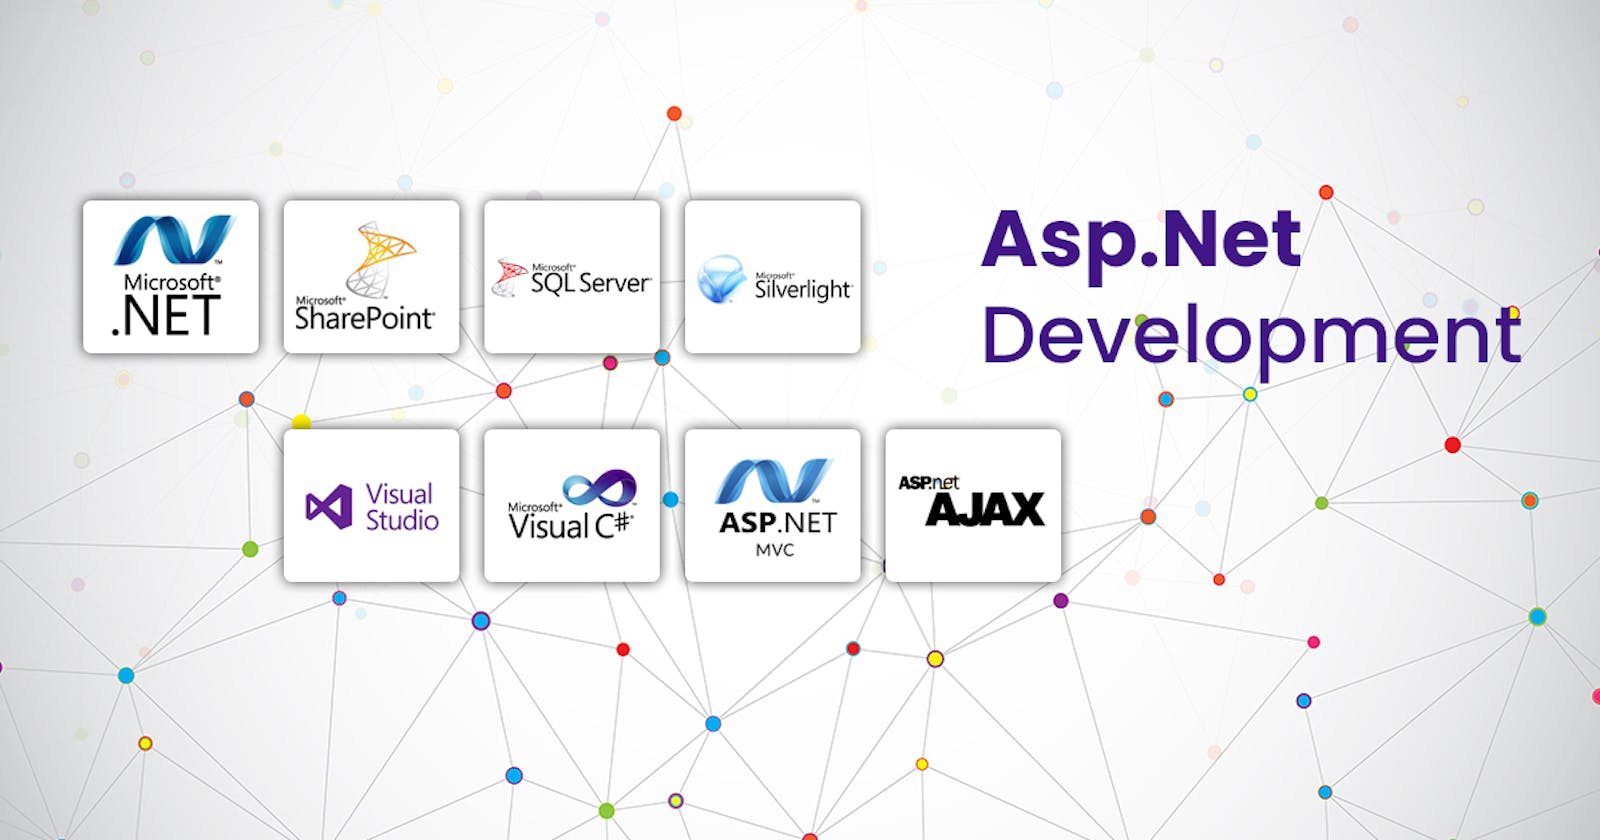 ASP.NET Development – The Most Favourite Among The Developers